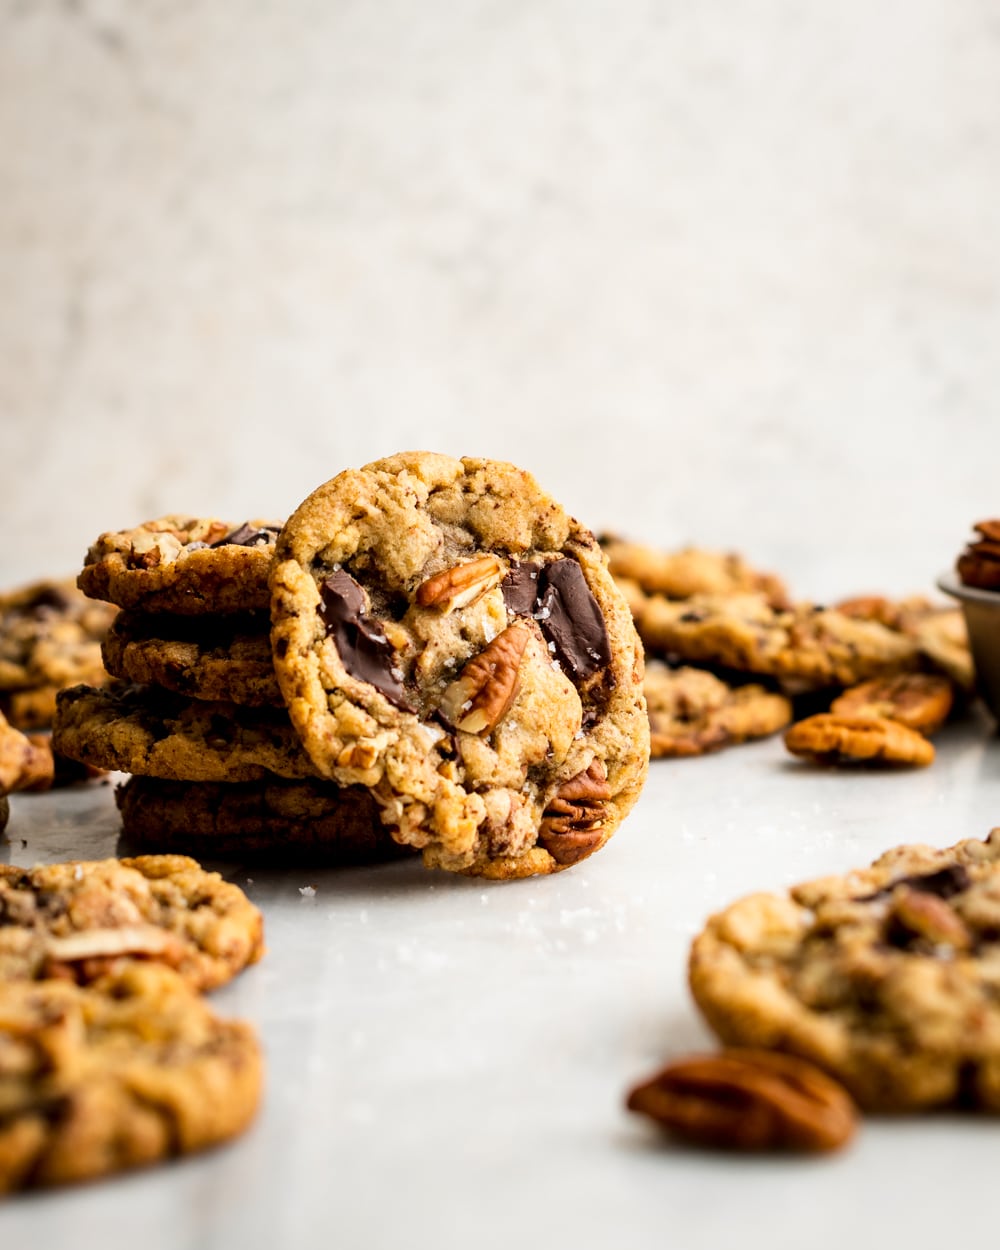 https://asassyspoon.com/wp-content/uploads/chewy-pecan-chocolate-chip-cookies-a-sassy-spoon-5.jpg